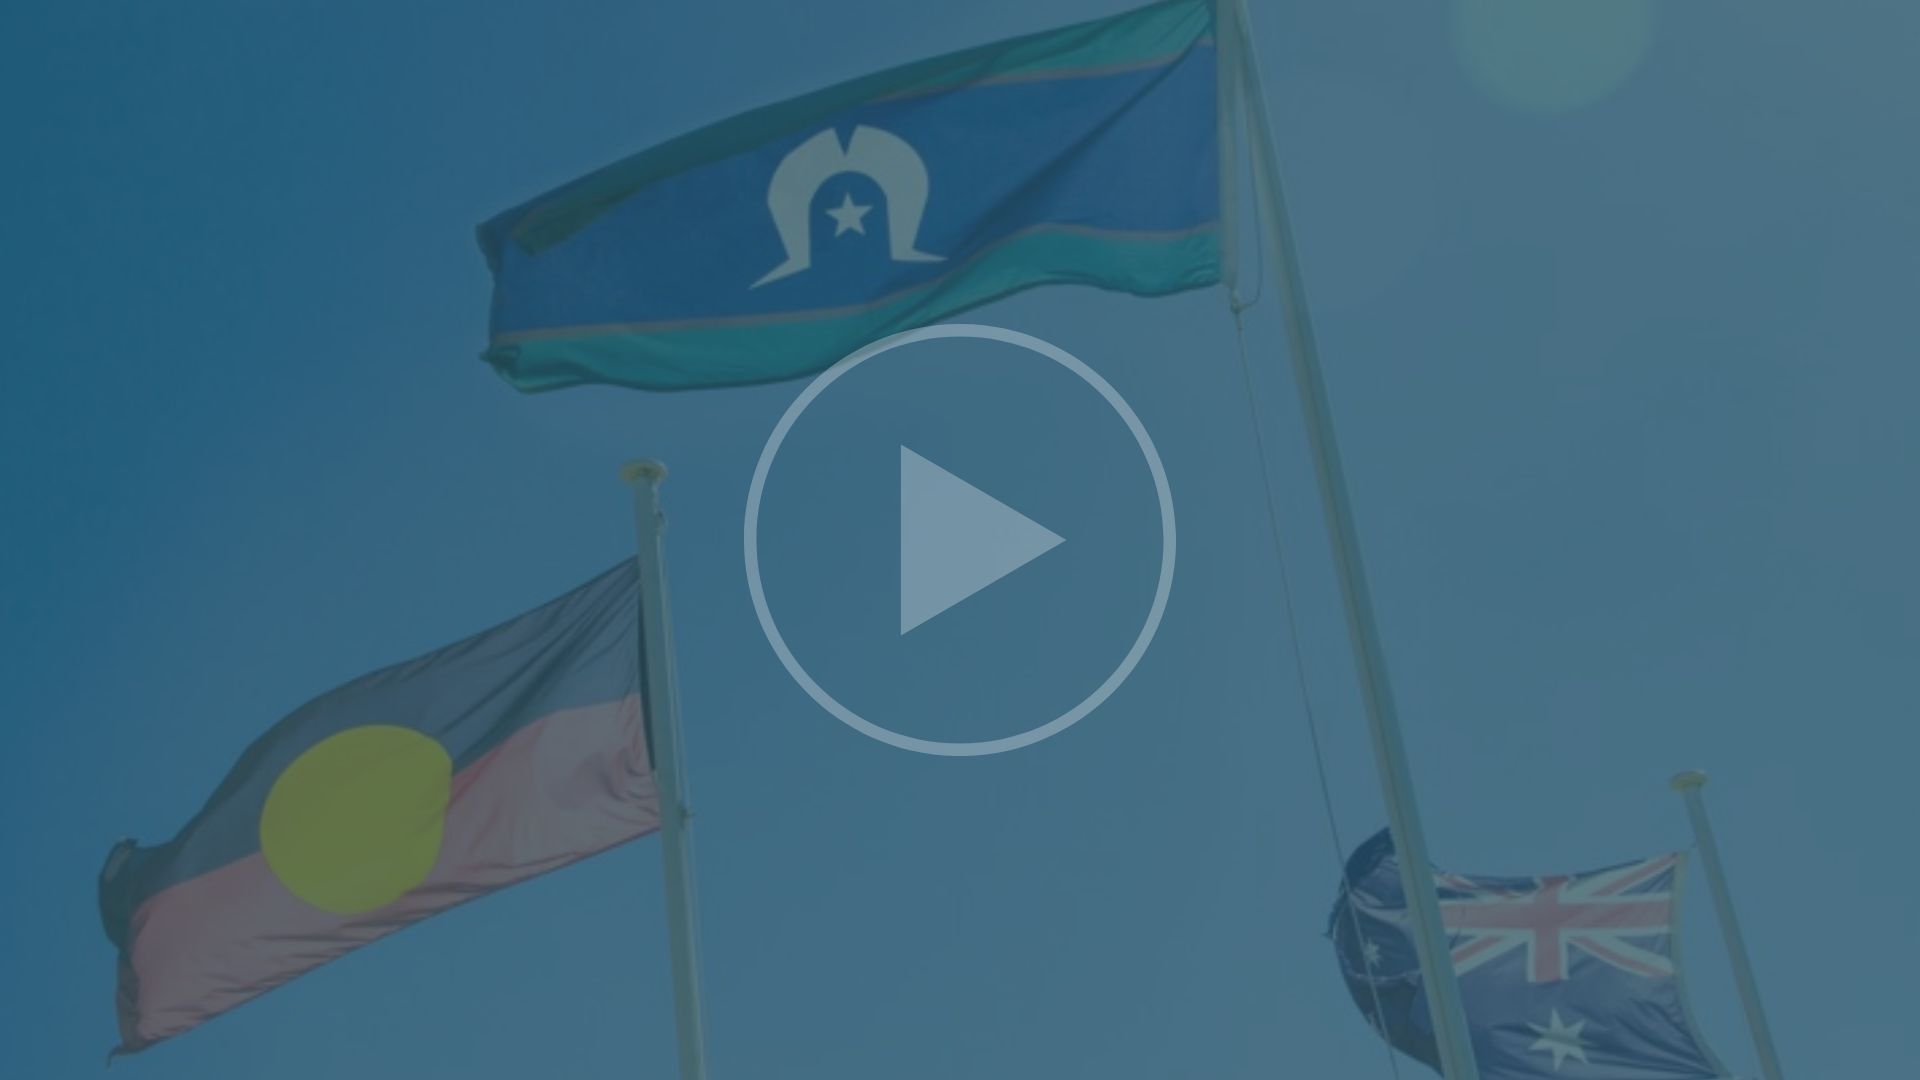 Photo of Aboriginal and Torres Strait Island flags with a 'play' symbol overlaid